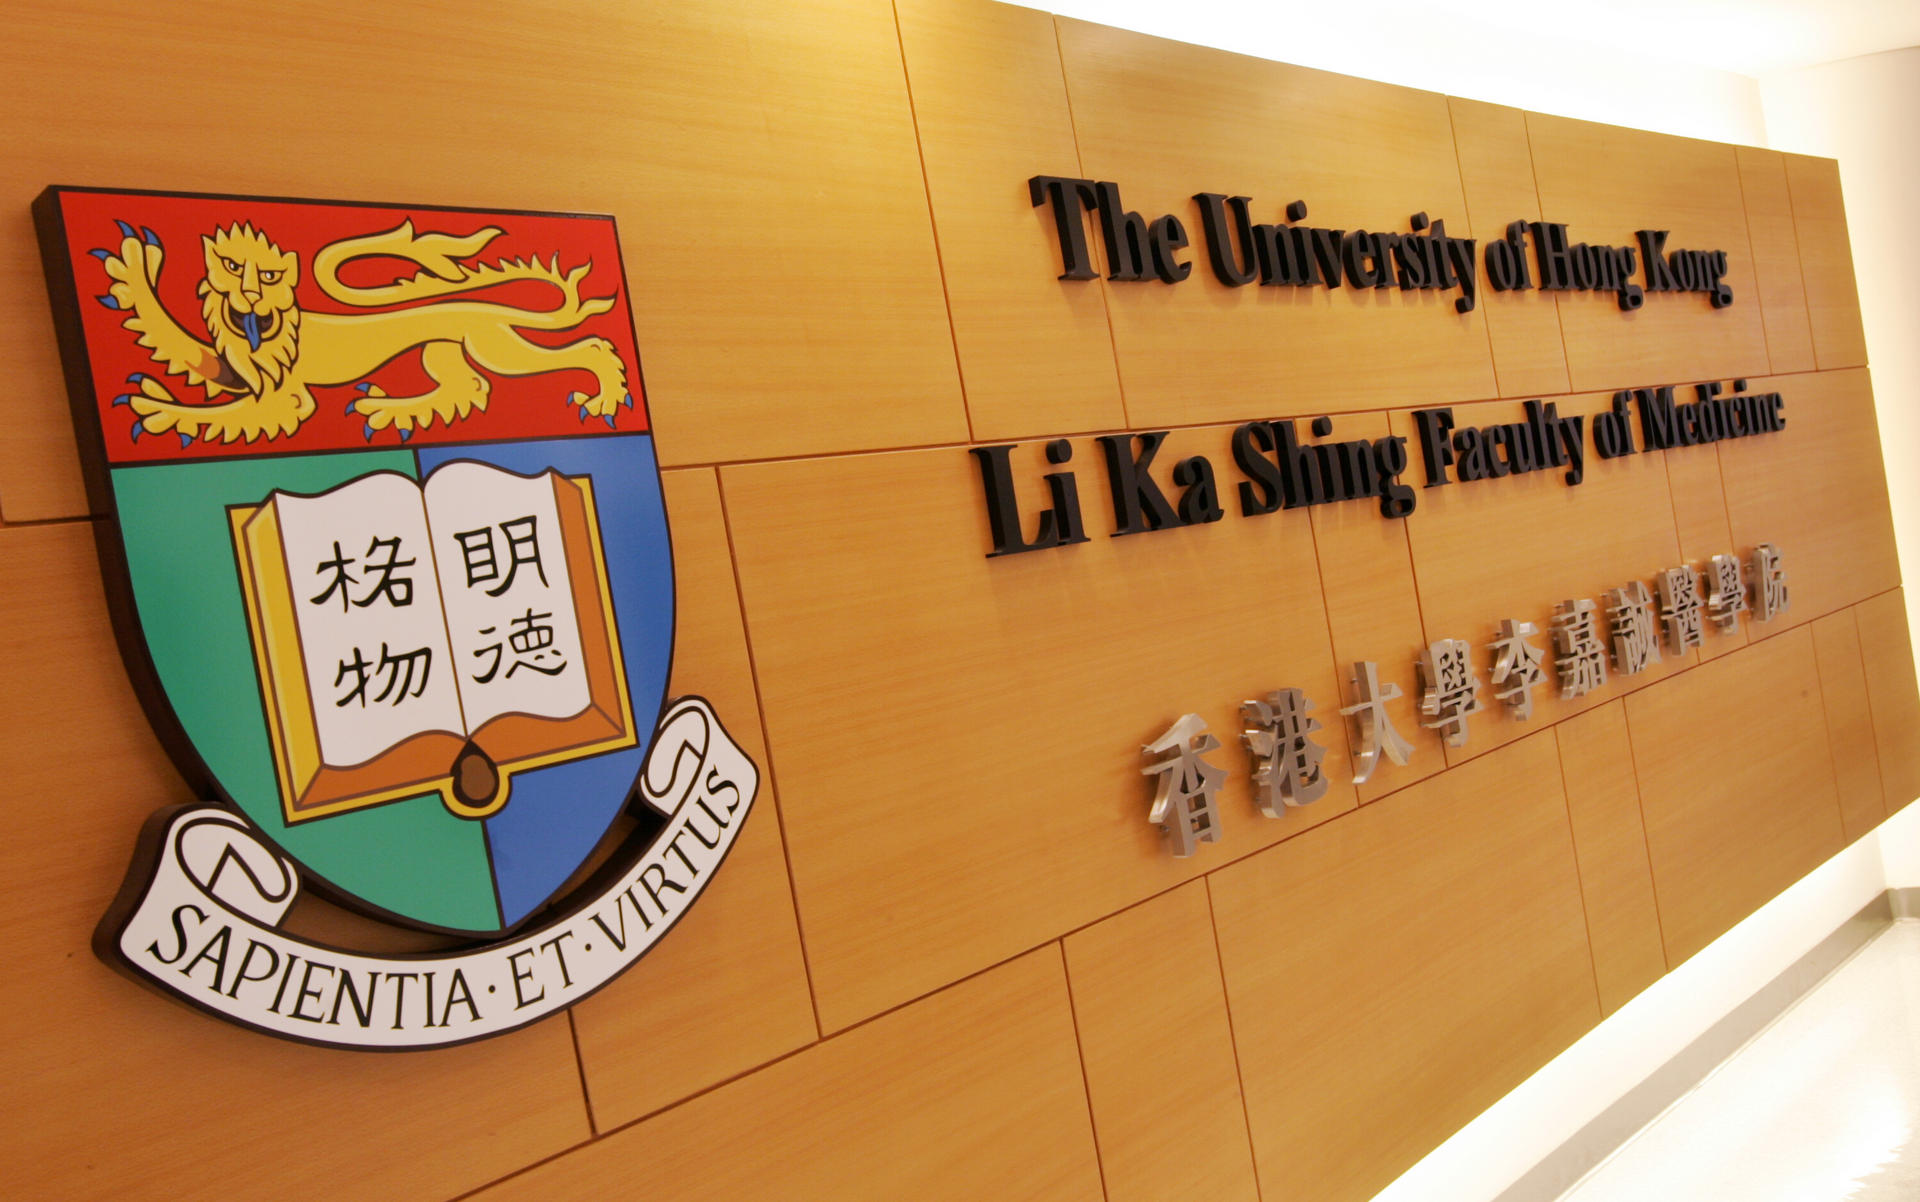 Scholarships may lure more talent to HKU's medical faculty. Photo: David Wong